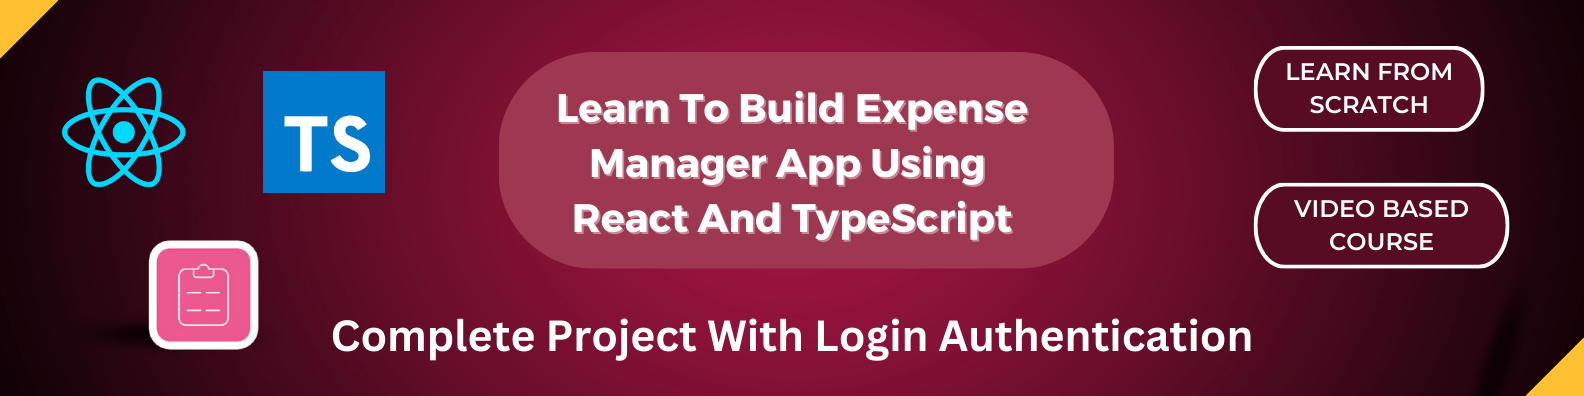 Learn To Build Expense Manager App Using React And TypeScript